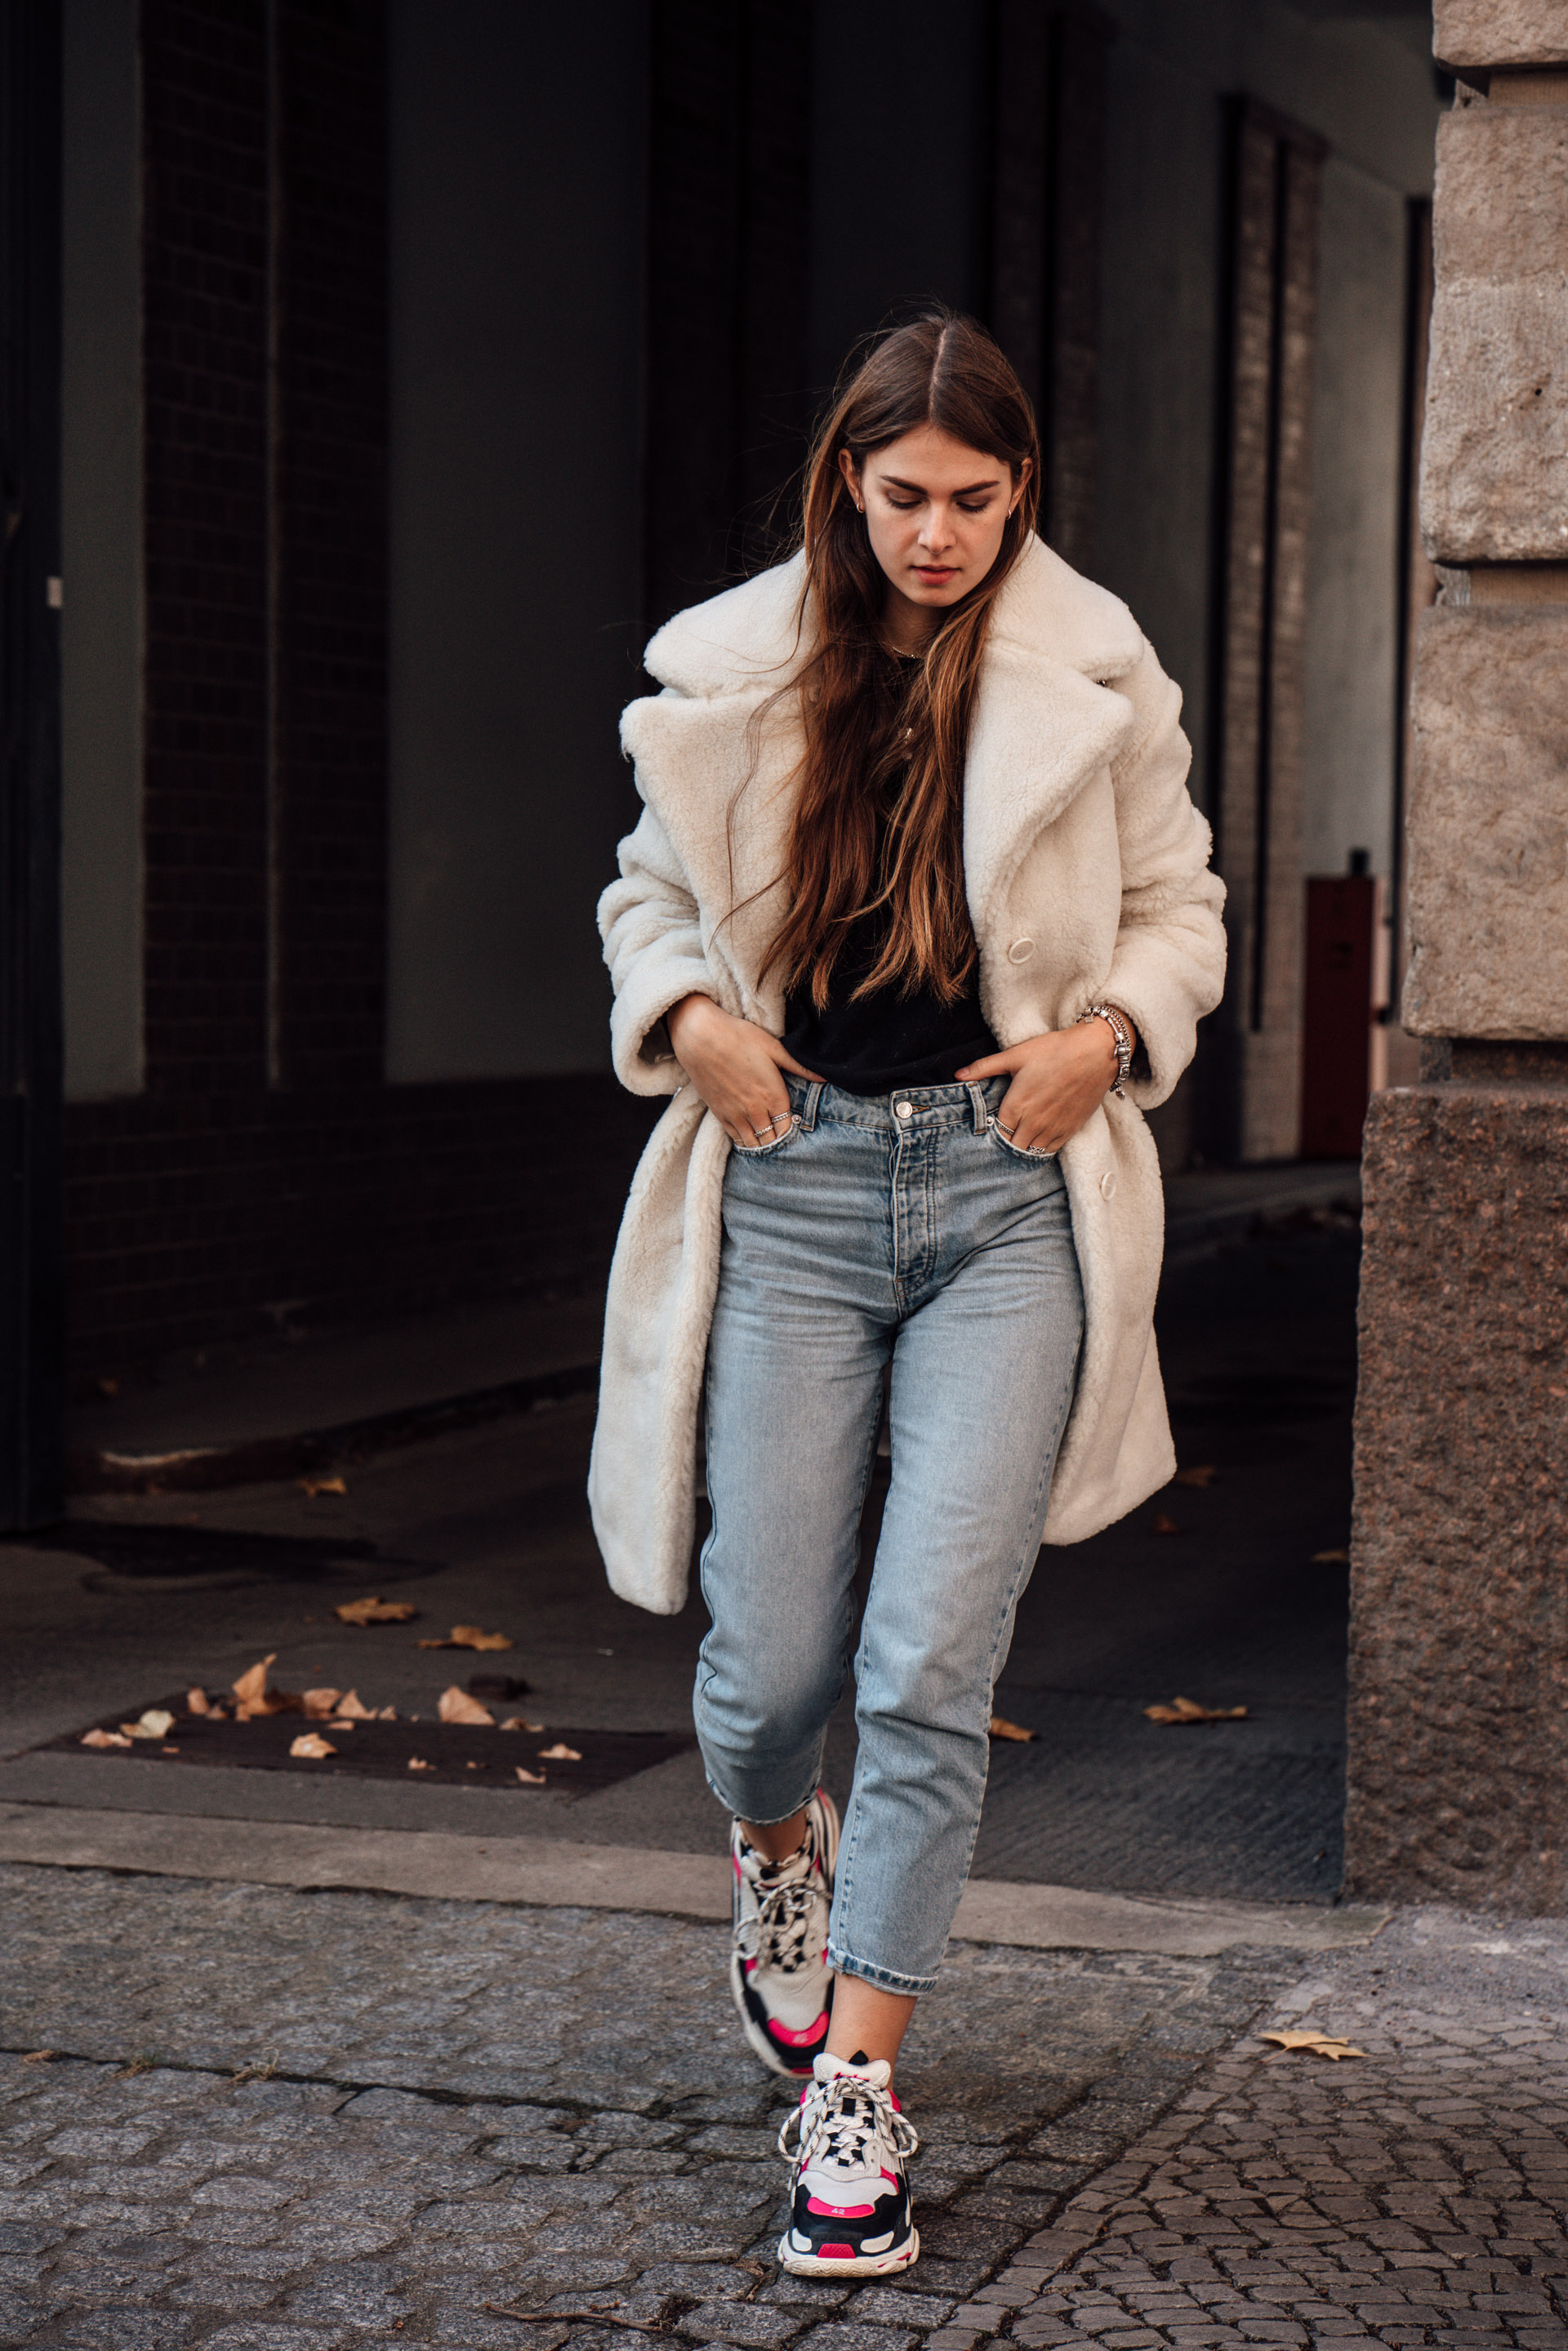 Winter Outfit with Teddy Coat and Ugly Sneakers